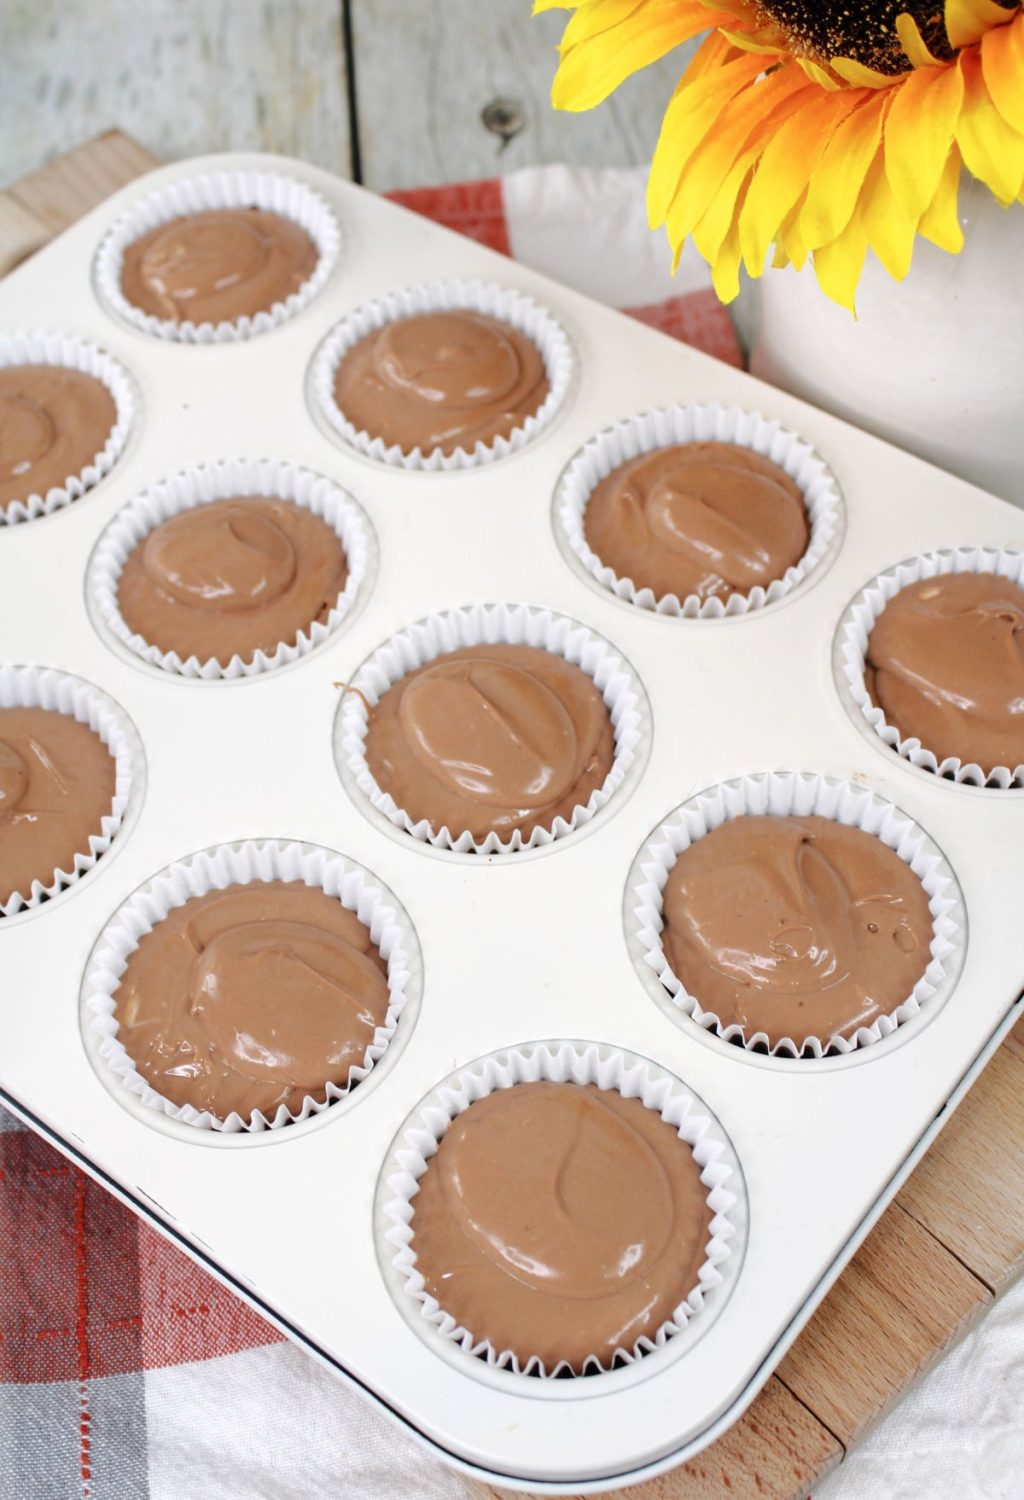 Chocolate cupcakes in a muffin tin with sunflowers.